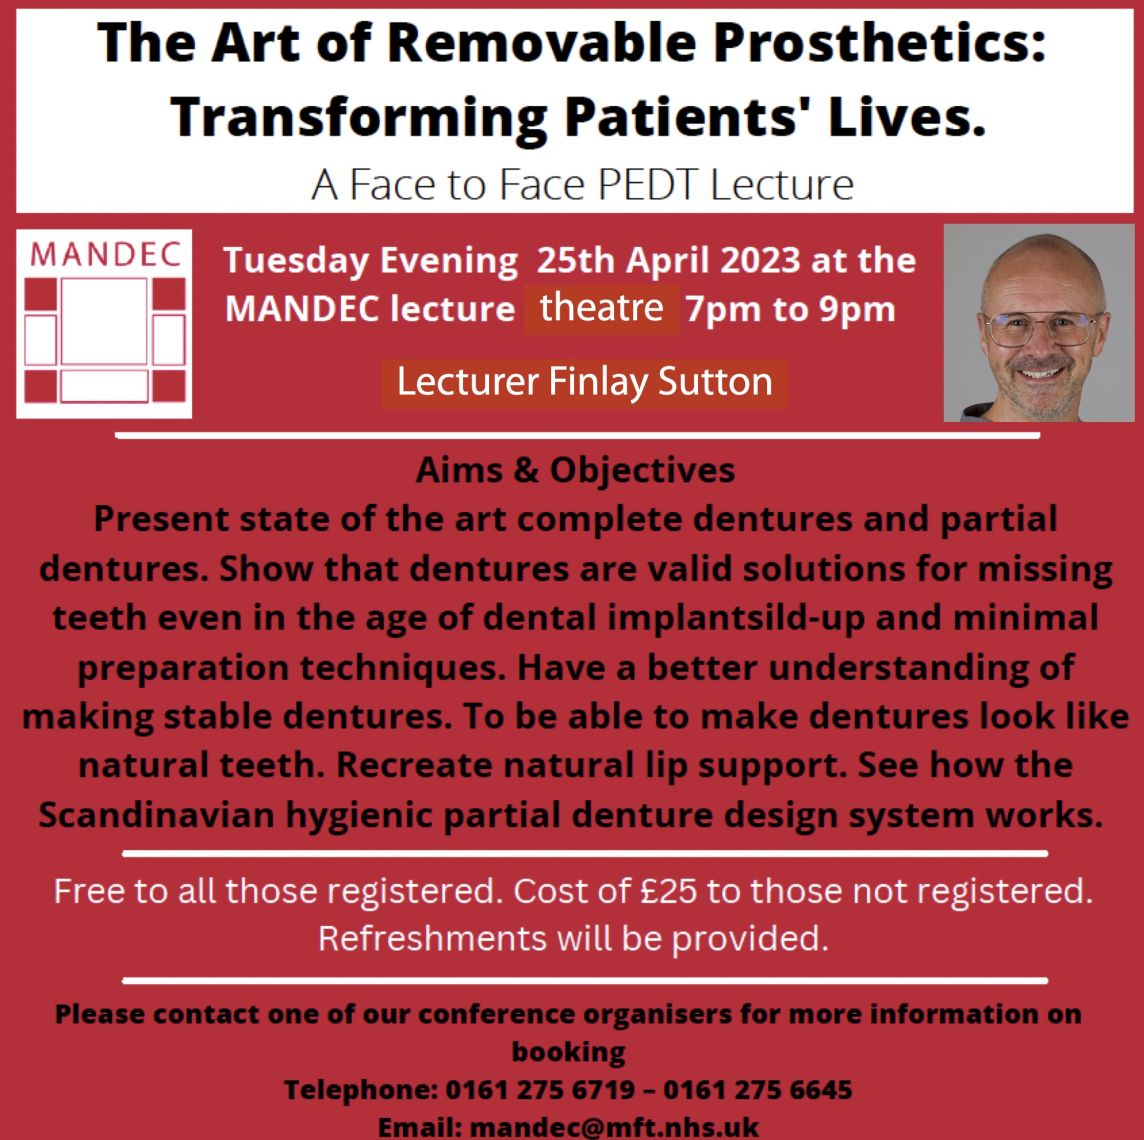 The Art of Removable Prosthetic Dentistry: Transforming Patients' Lives. A Face to Face Lecture - Manchester Dental Hospital ManDec